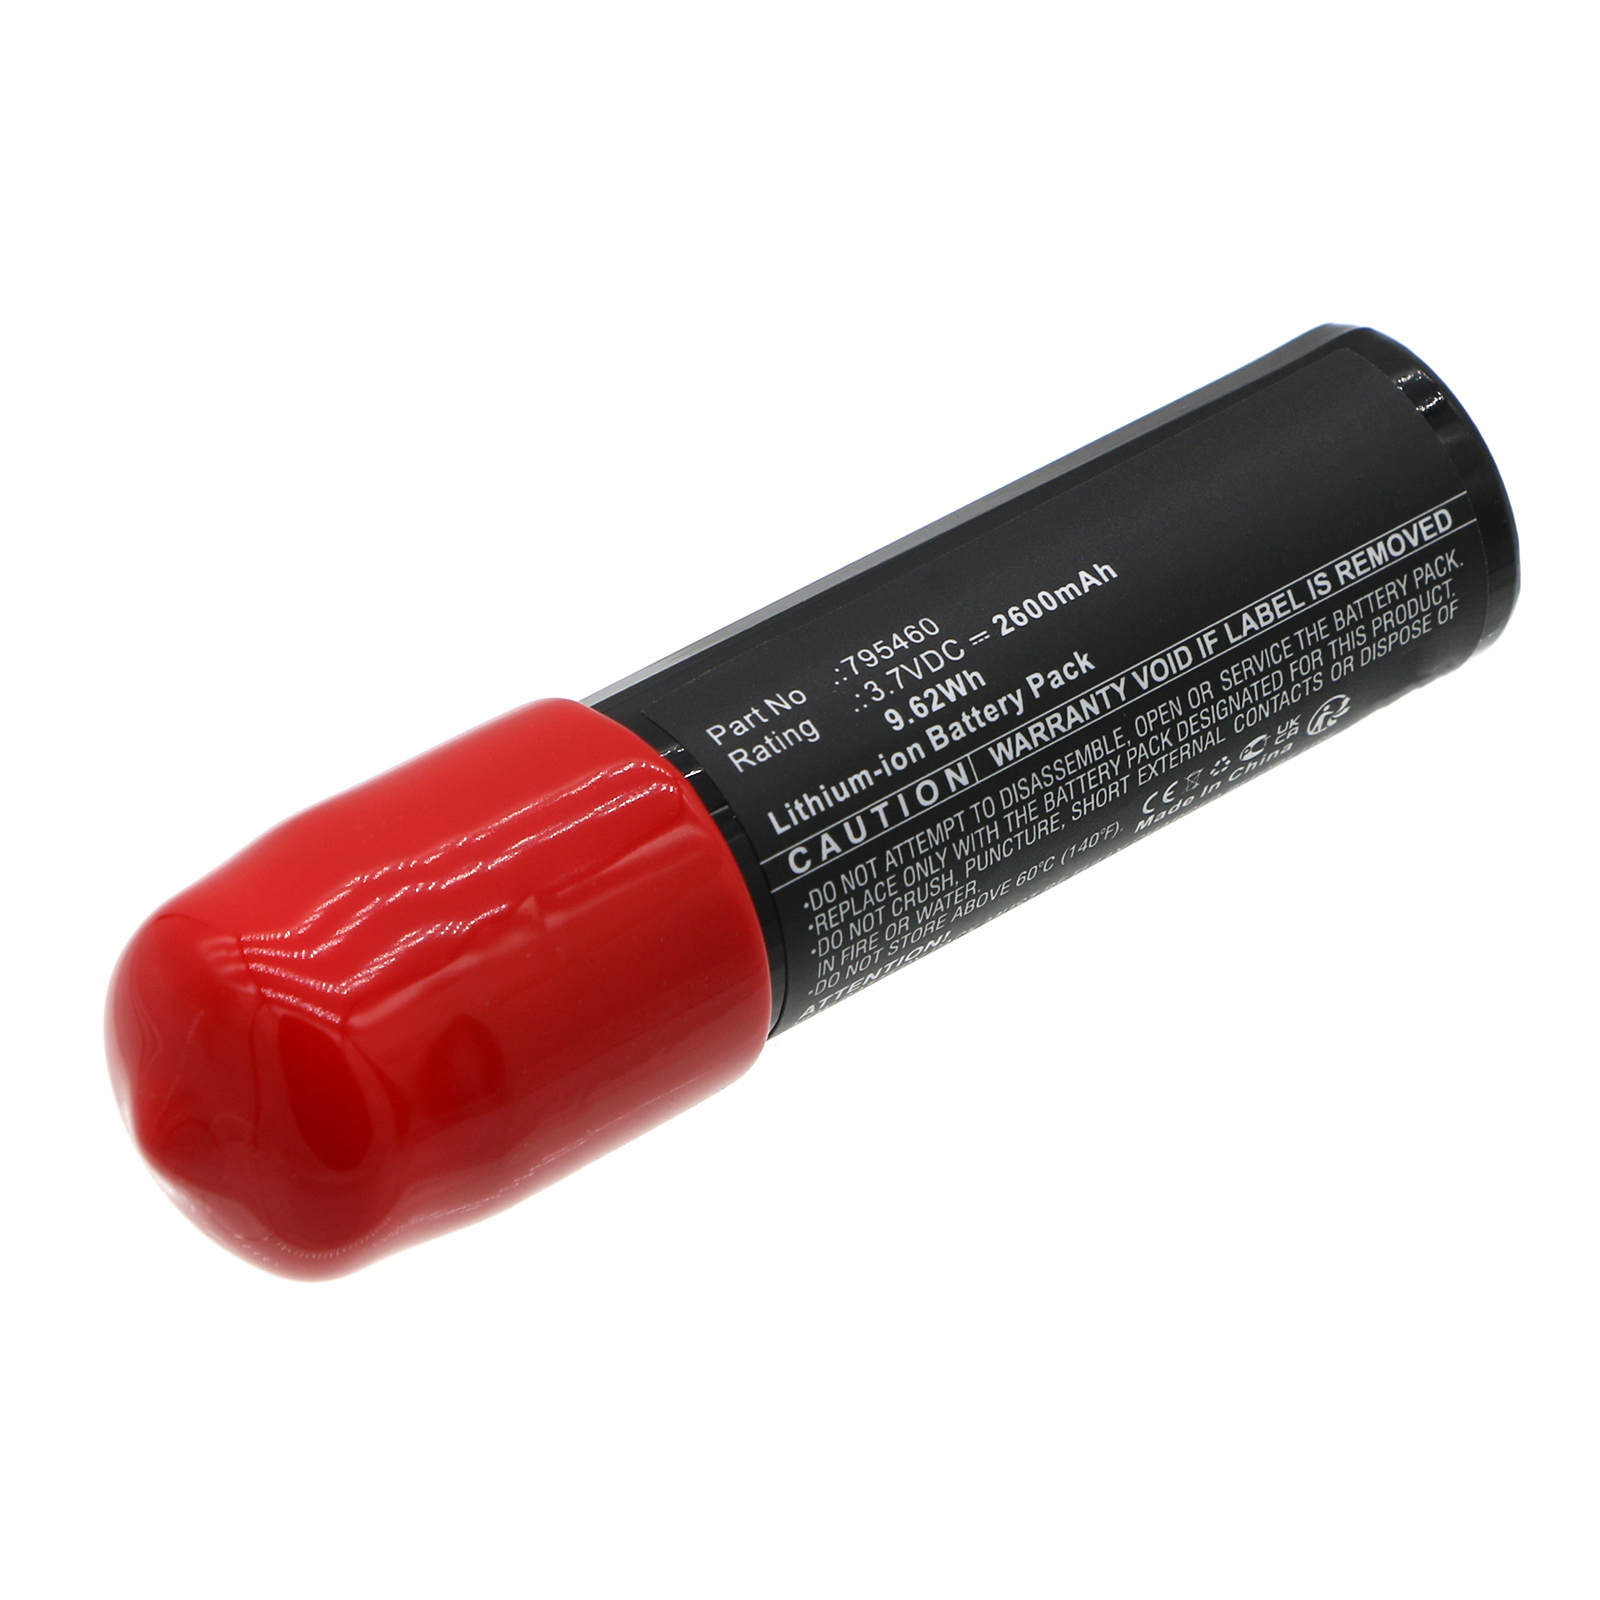 Synergy Digital Equipment Battery, Compatible with Leica 795460 Equipment Battery (Li-ion, 3.7V, 2600mAh)